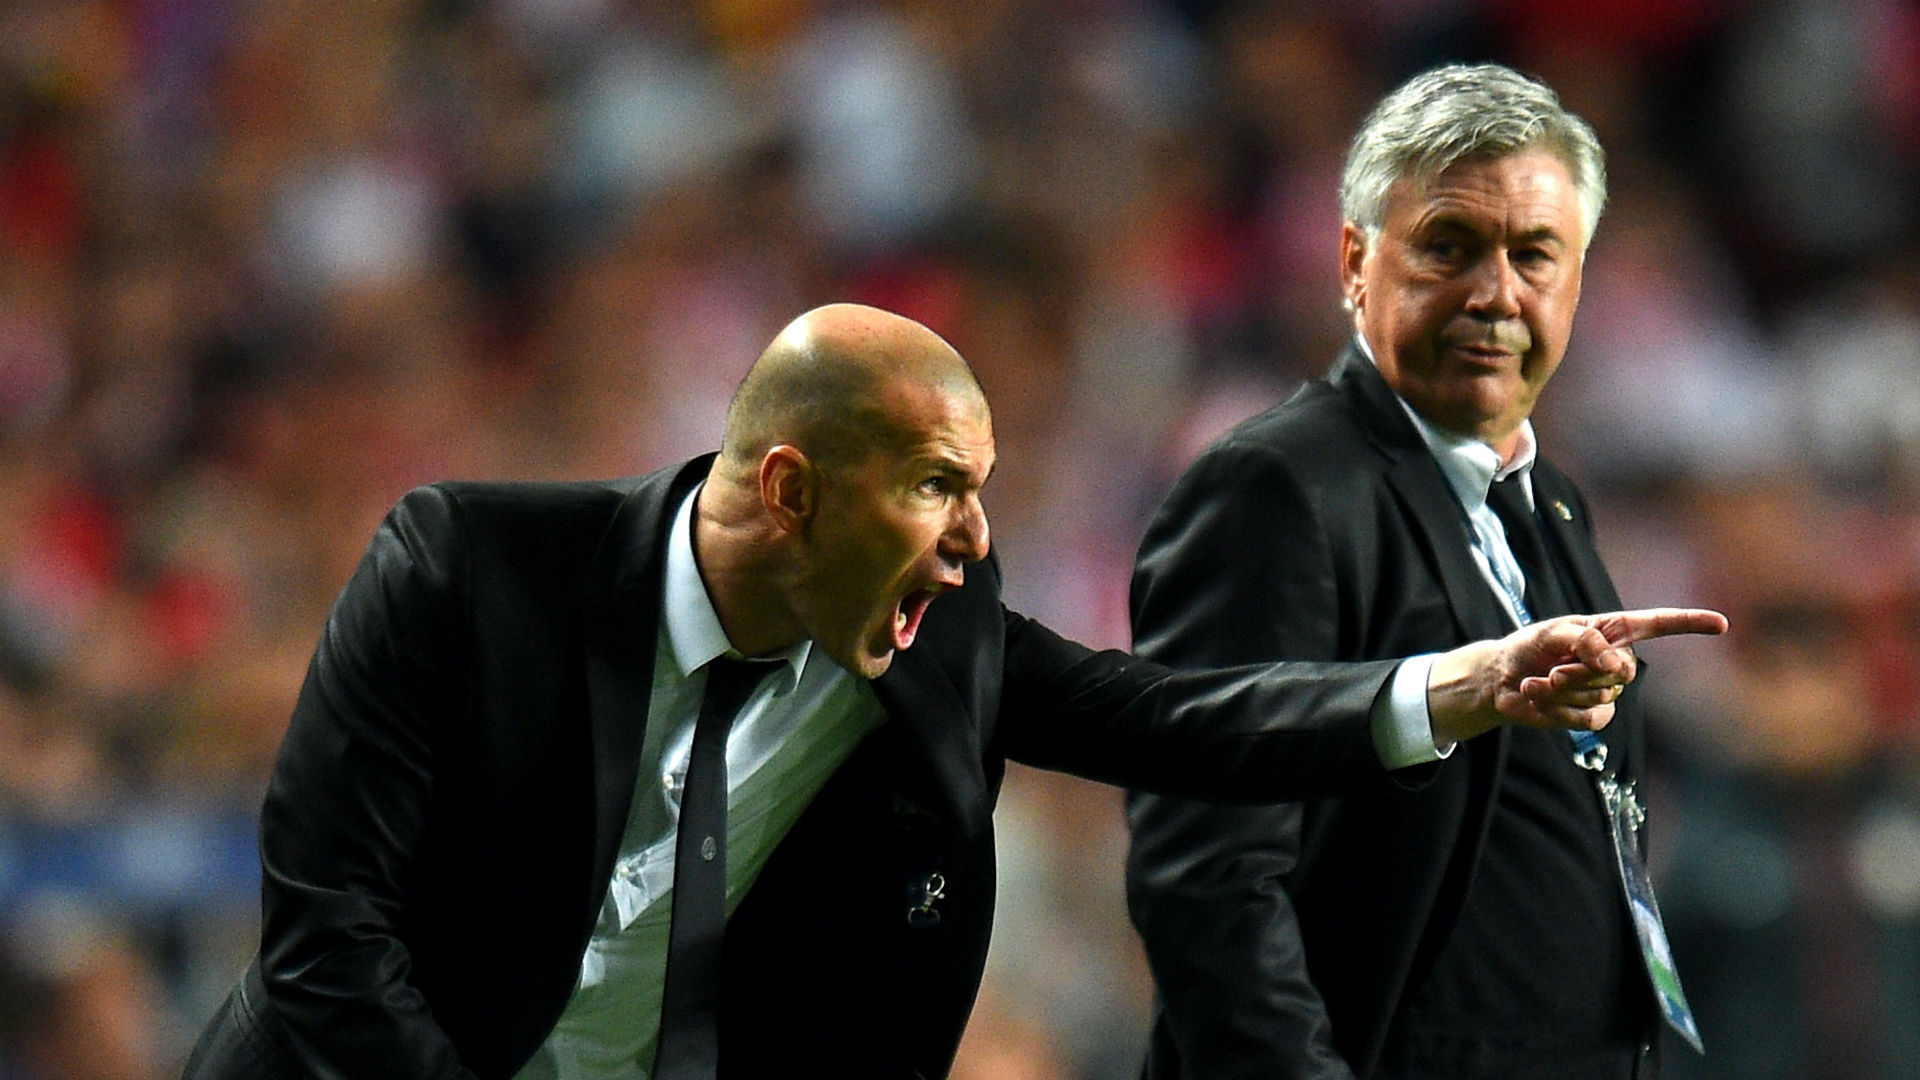 Zidane ready to turn Ancelotti lessons upon his old master in Bayern-Madrid clash